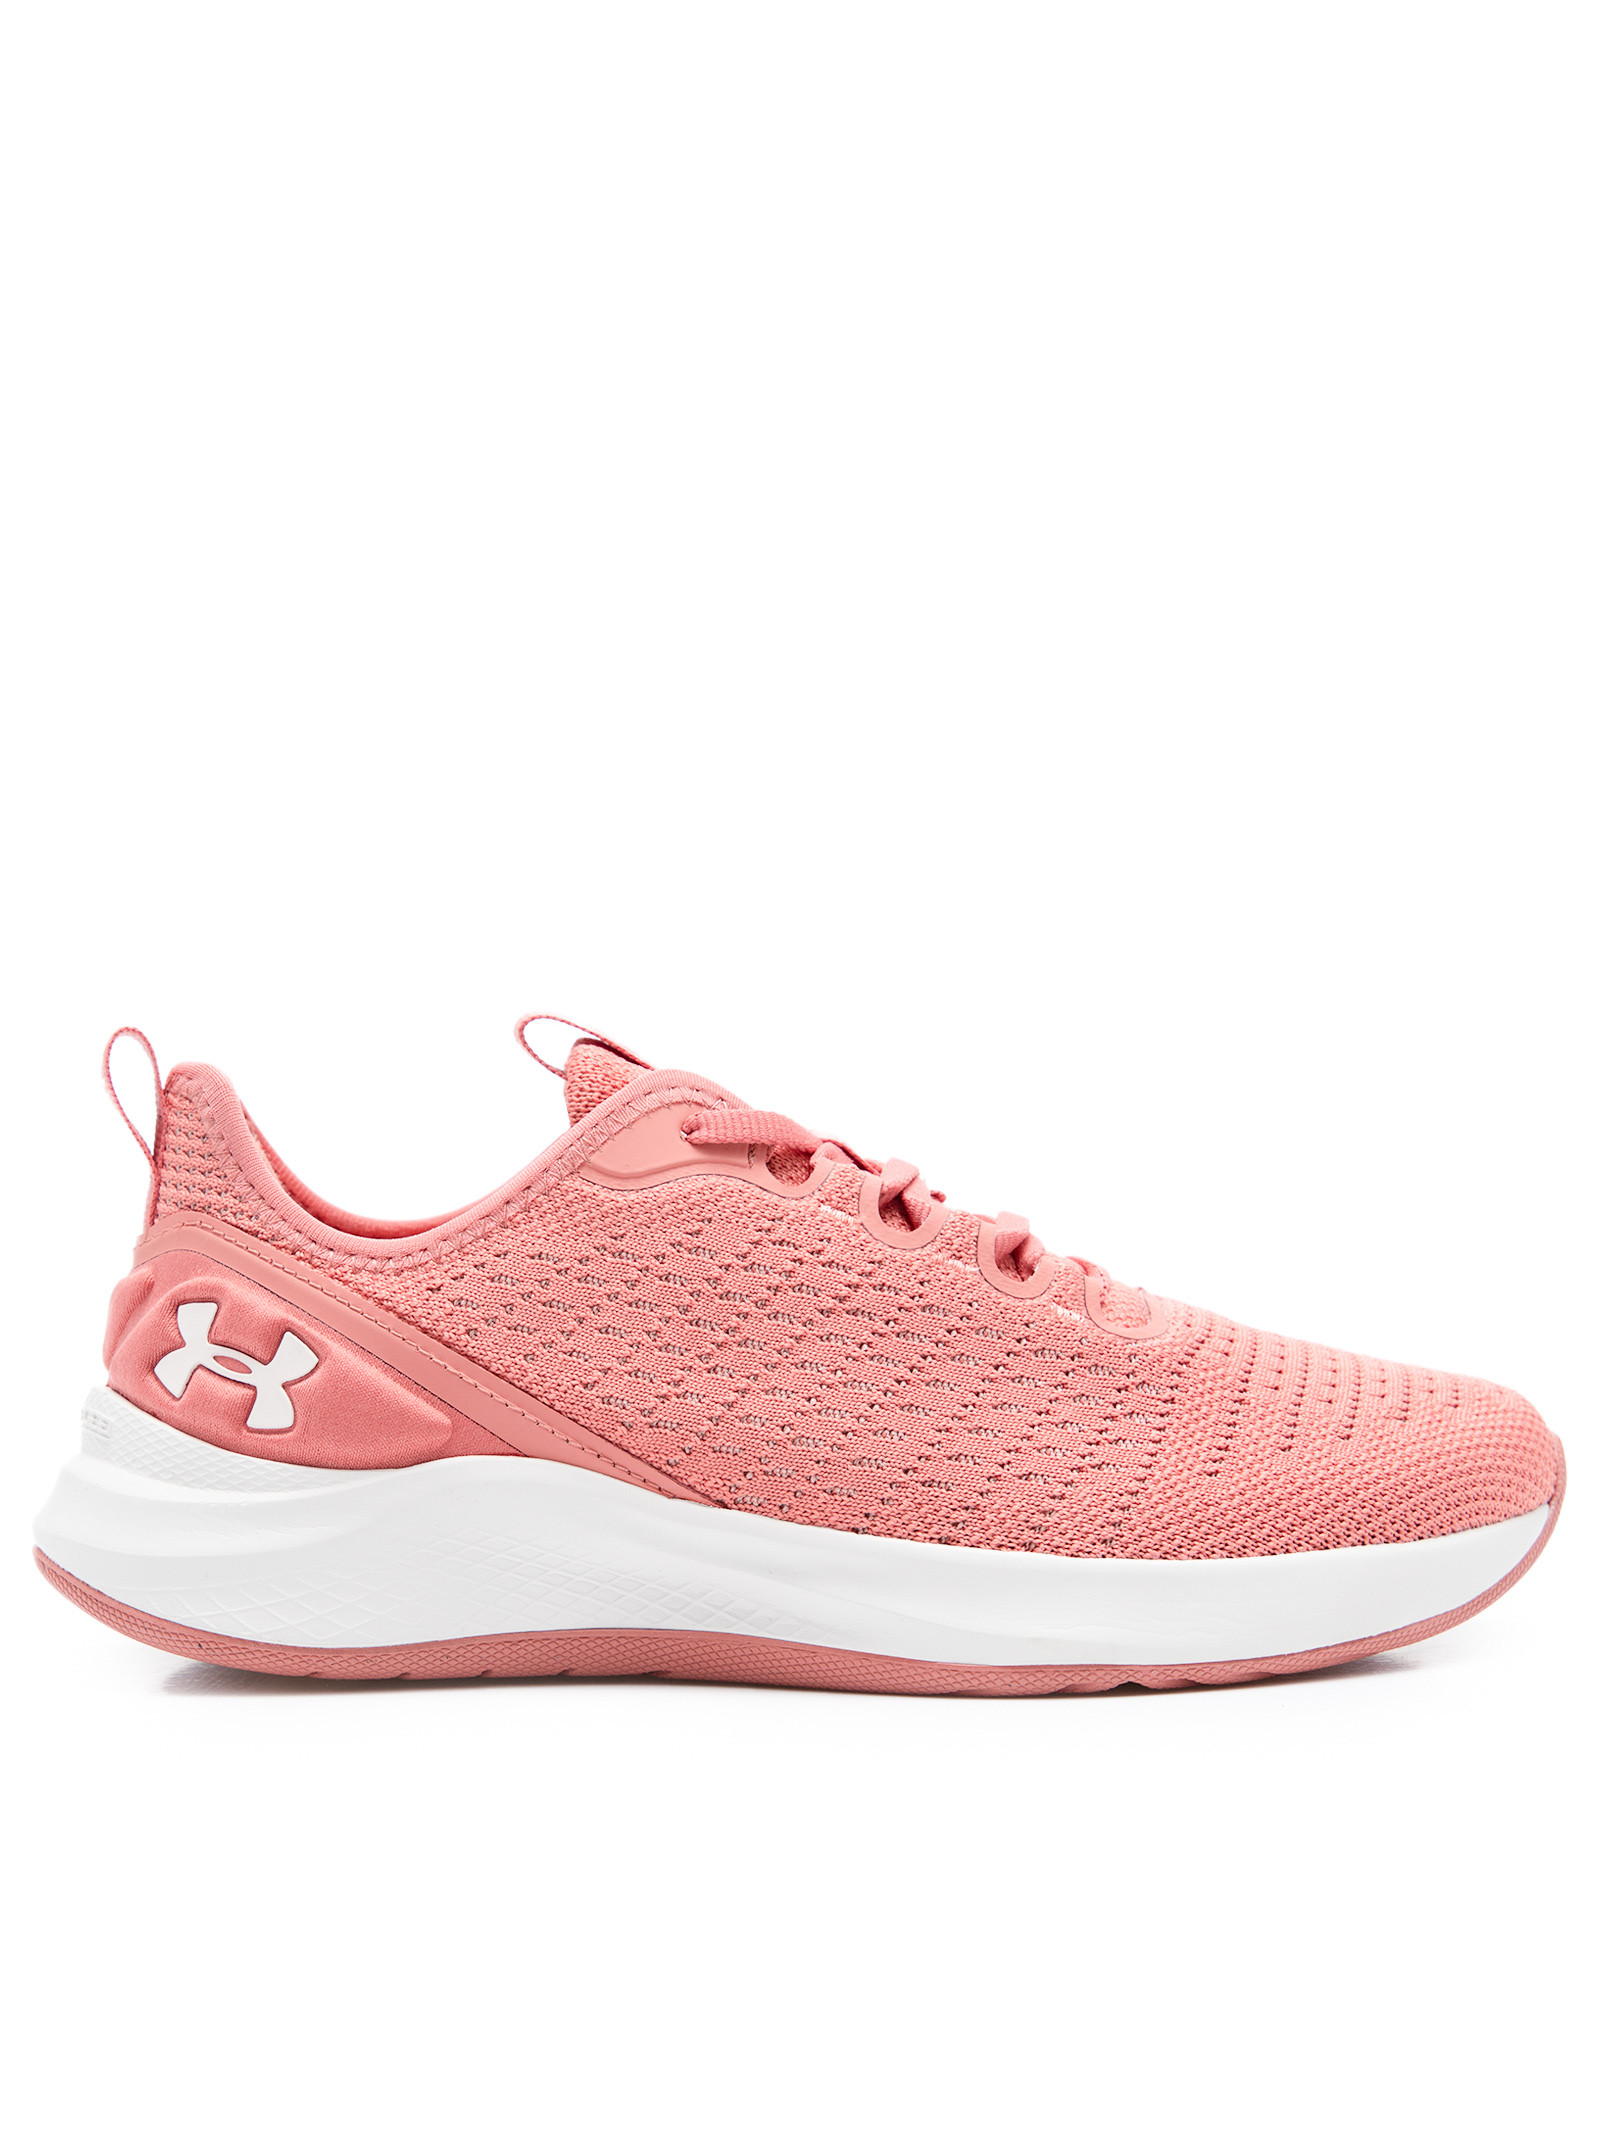 Tênis Under Armour Charged First Feminino Rosa 